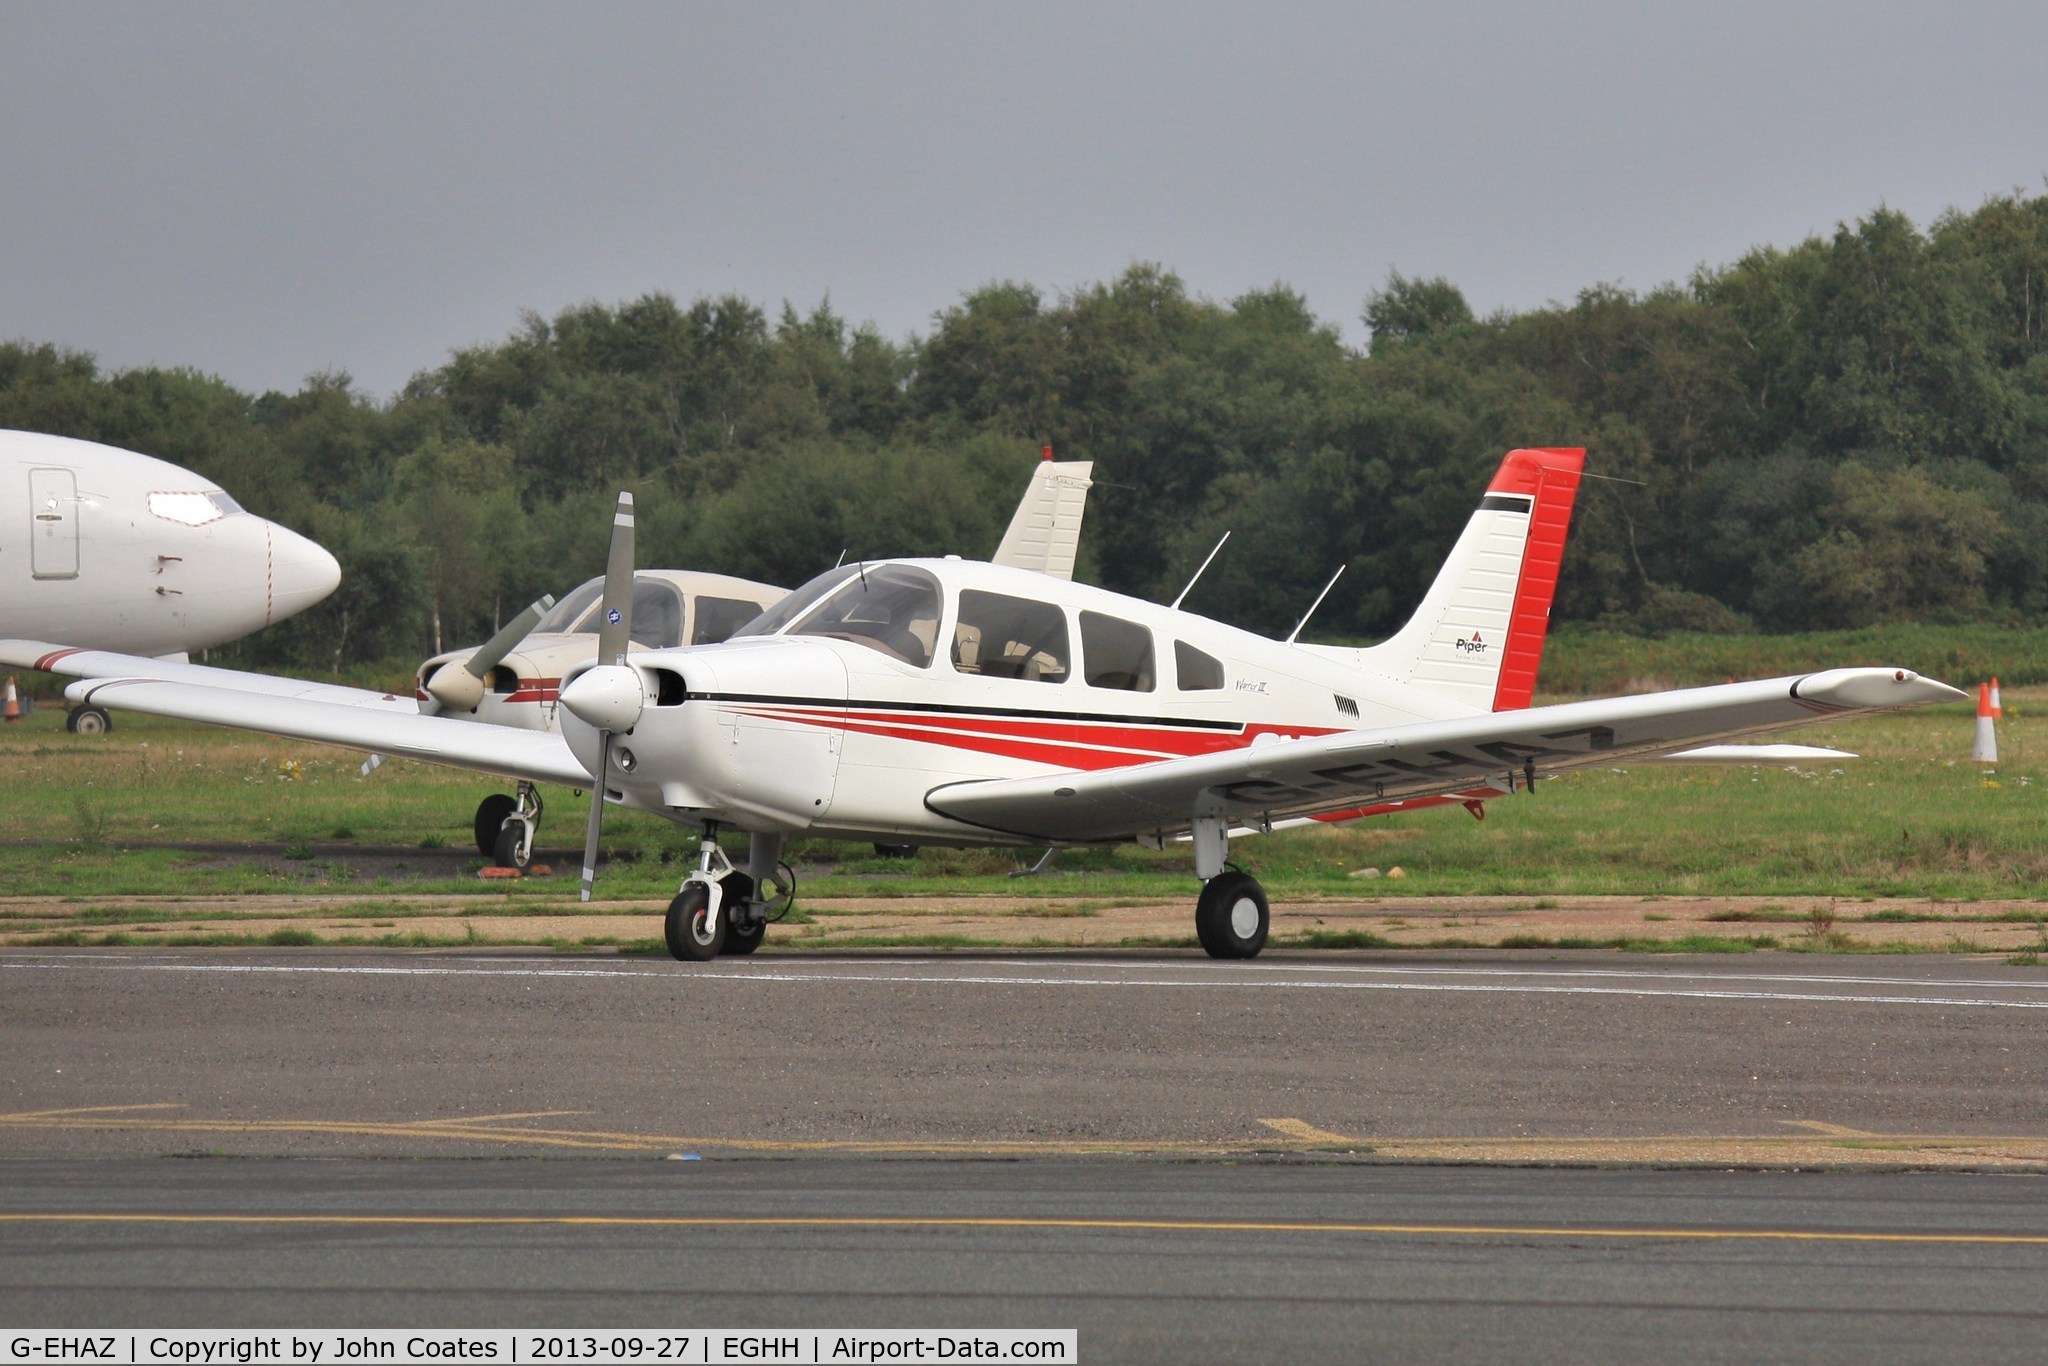 G-EHAZ, 2002 Piper PA-28-161 Warrior III C/N 2842168, Visitor at ATNth